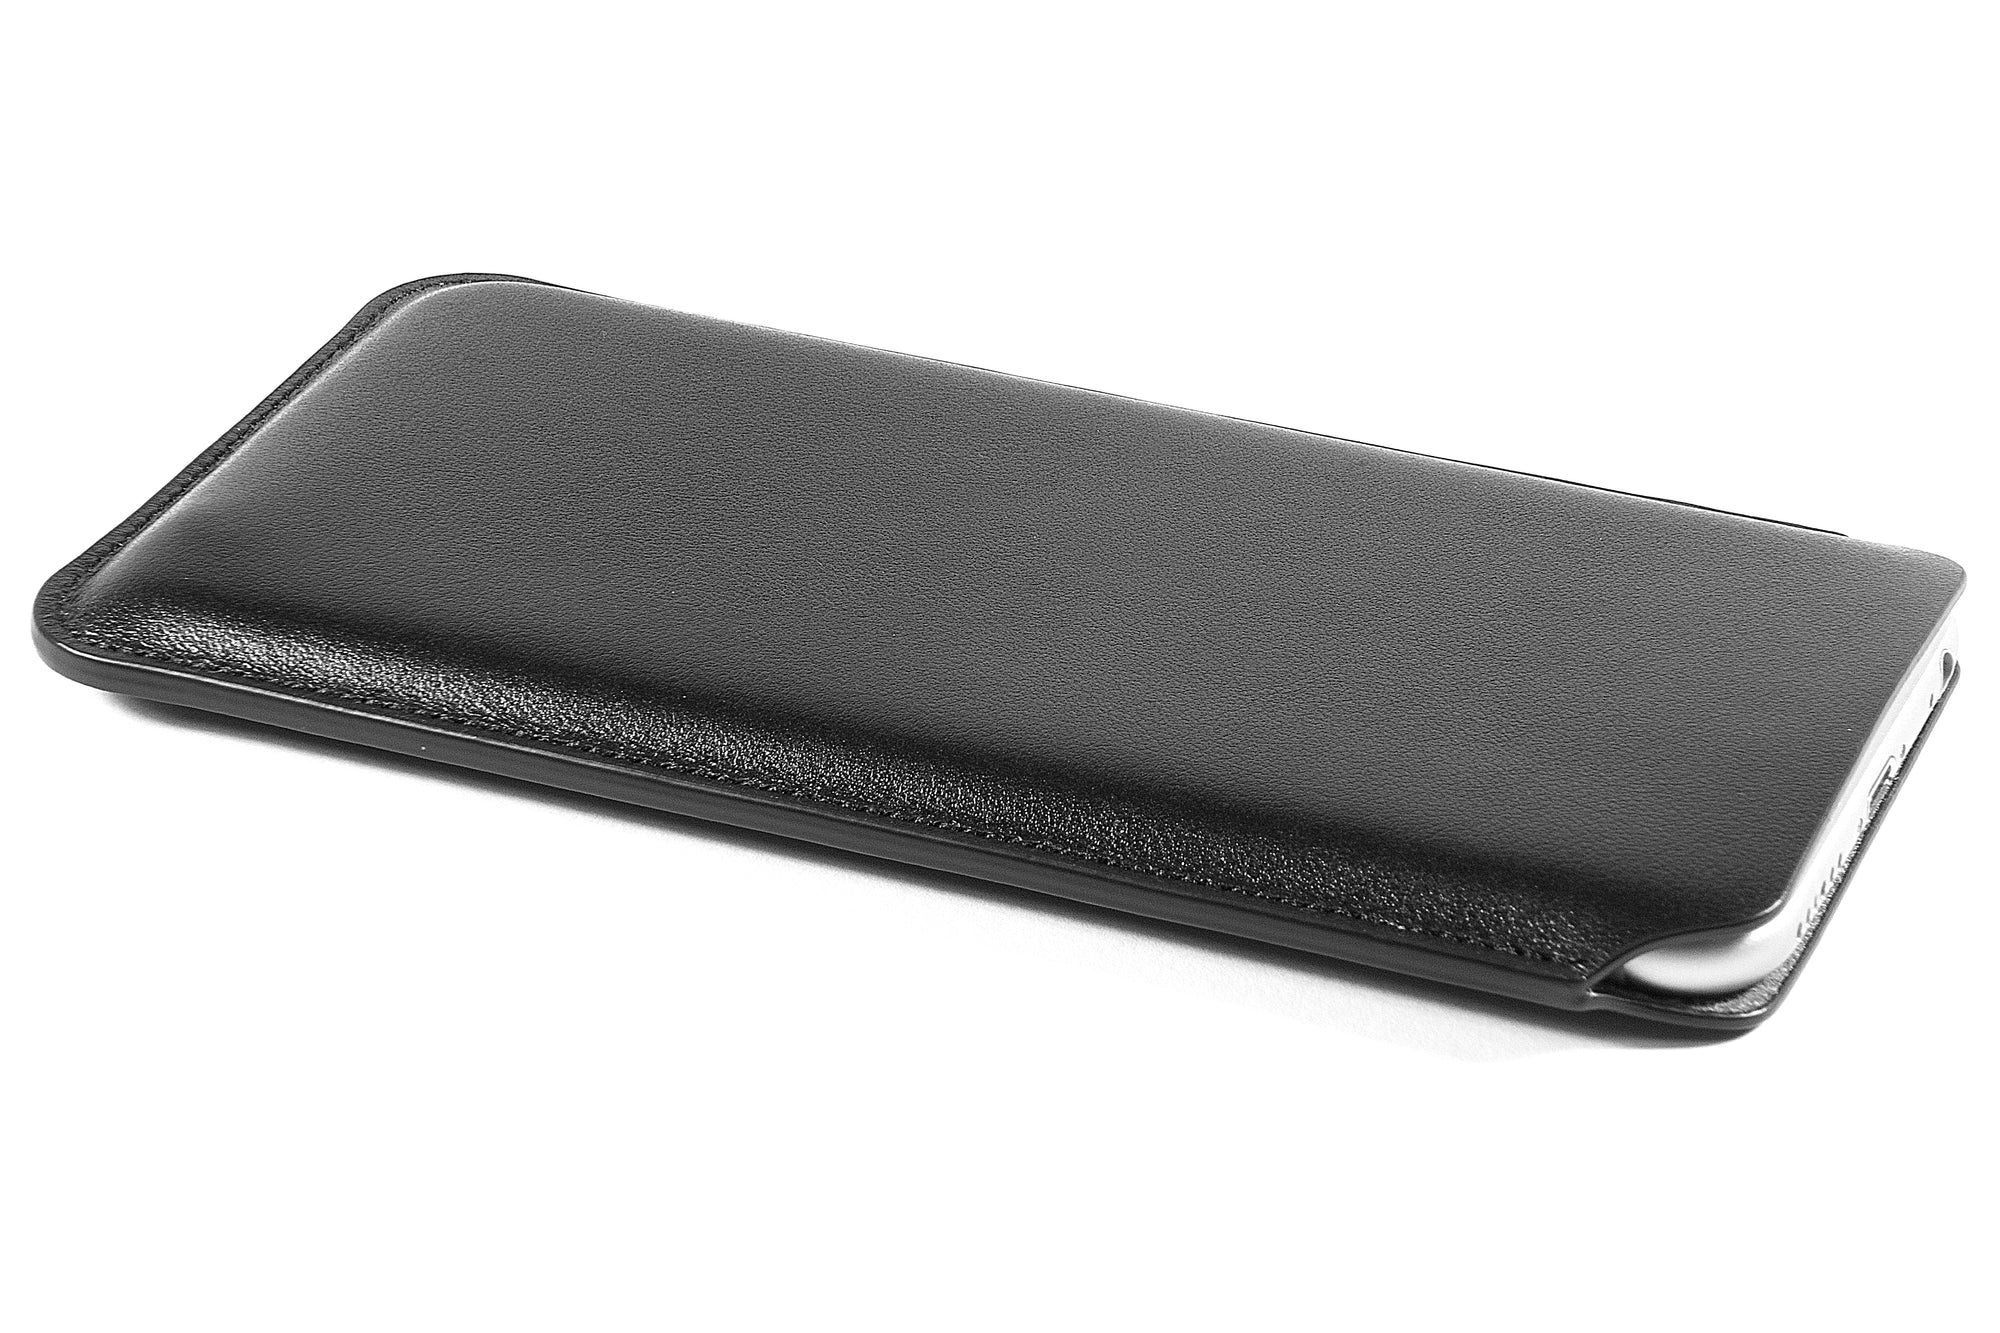 iPhone 8/7/6S/6 Leather Case Pouch - Skinny Fit - Black